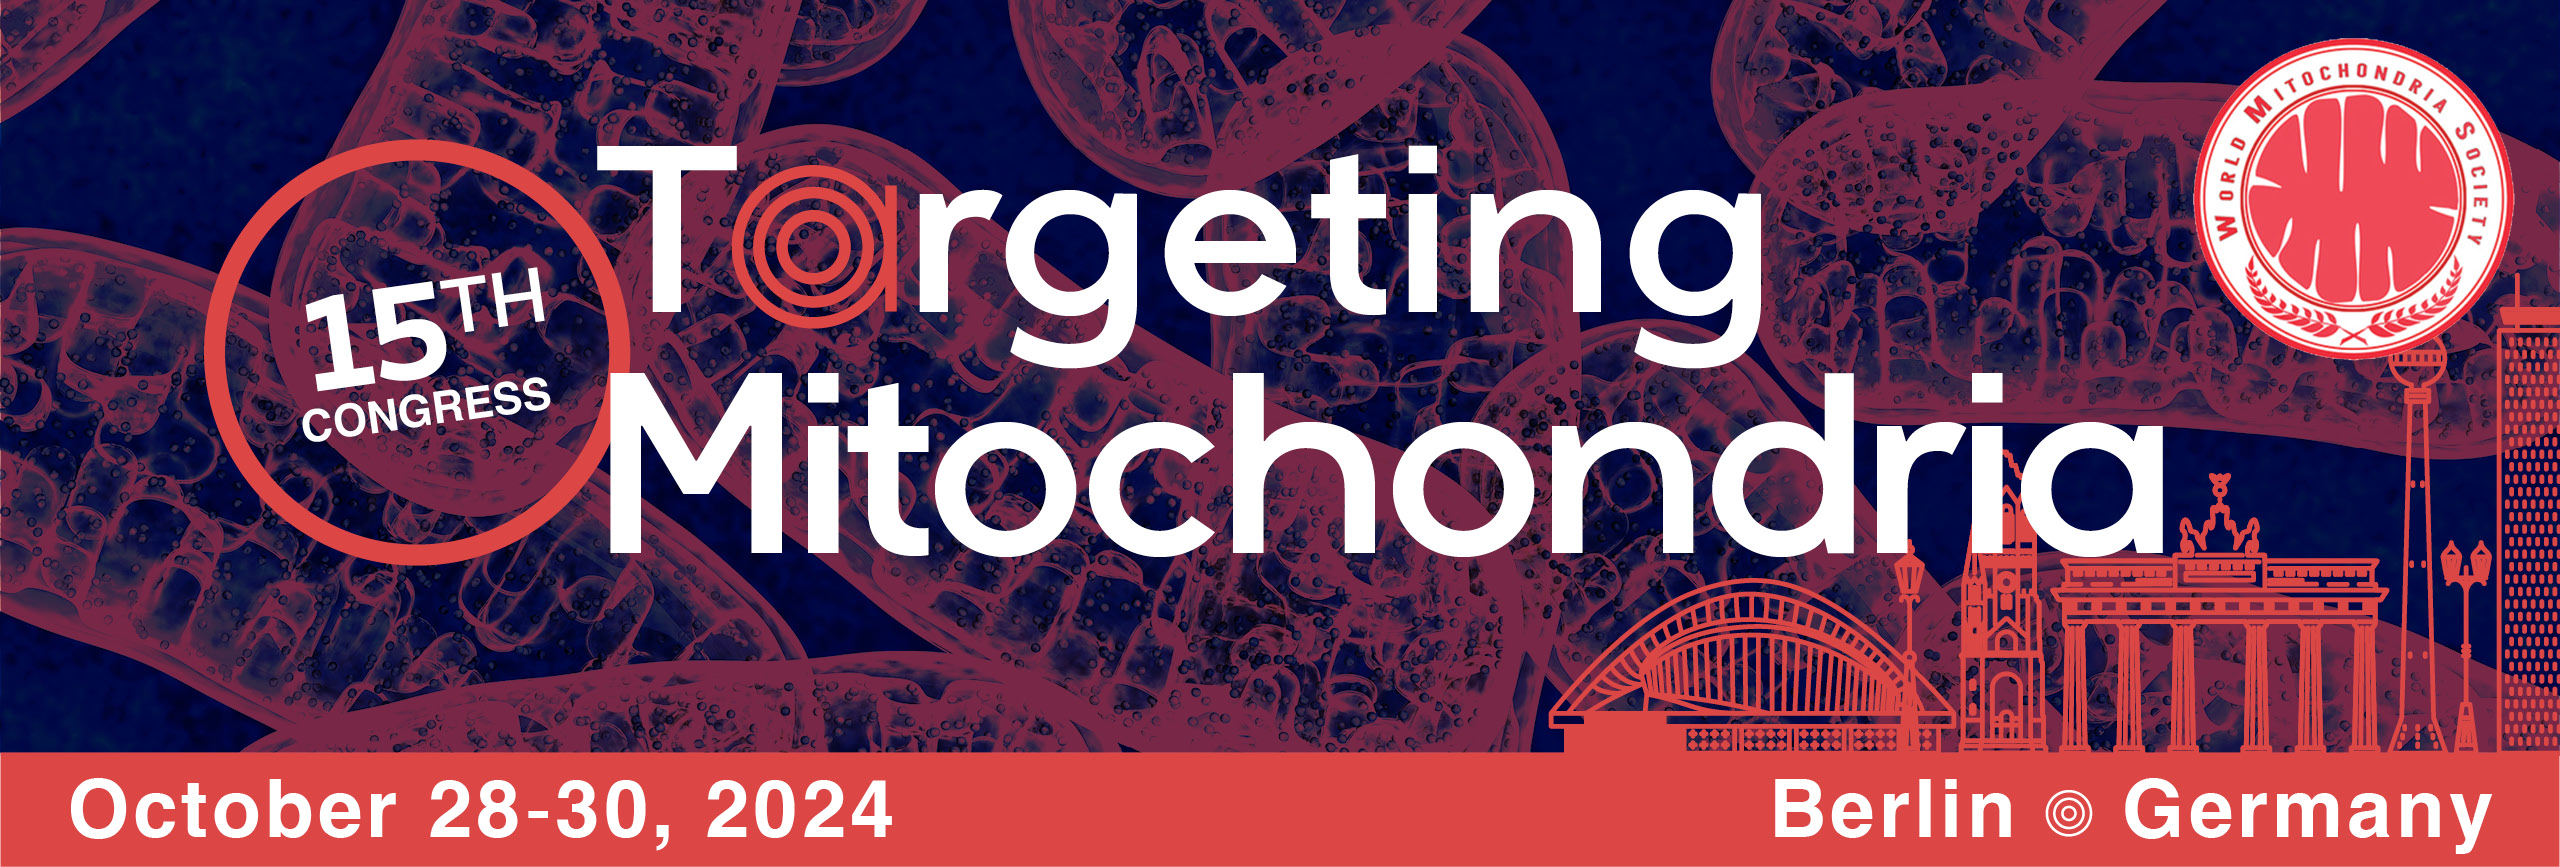 14th World Congress on Targeting Mitochondria | October 11-13, 2023 | Berlin, Germany 